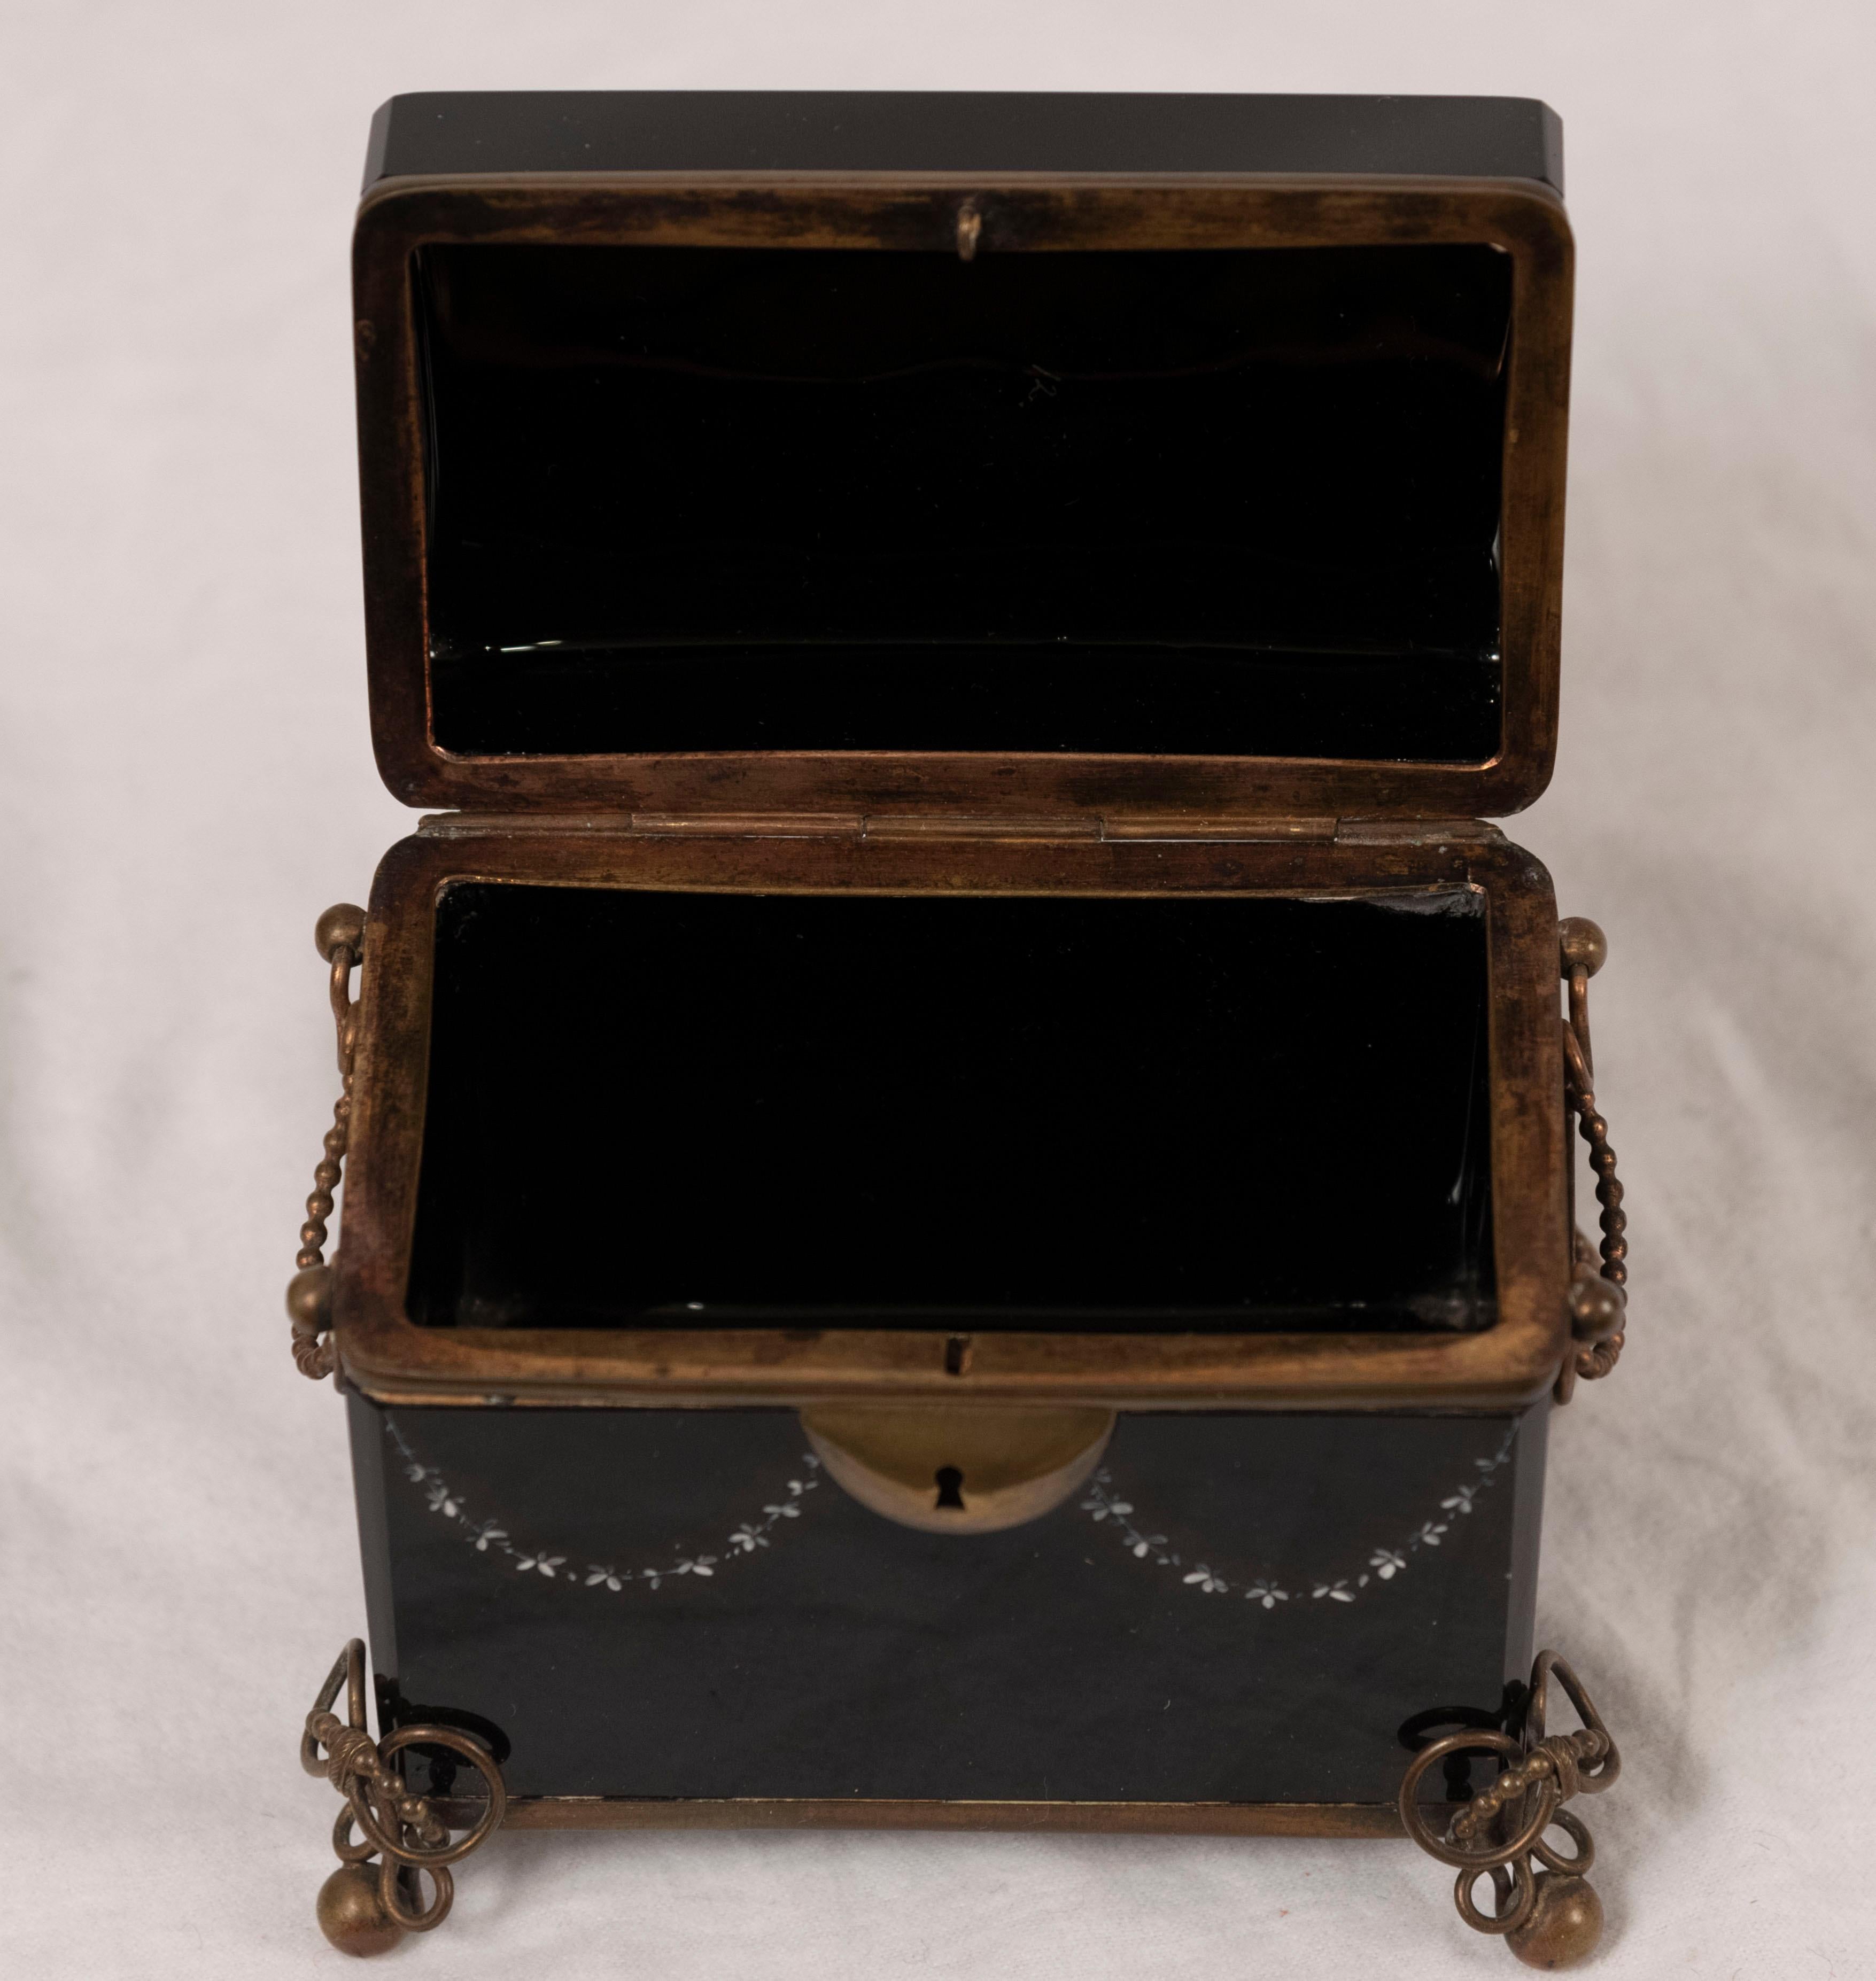 Mary Gregory enamel decorated black glass box in casket form. The lid is painted with a child jumping rope and set in a gilt metal stand.